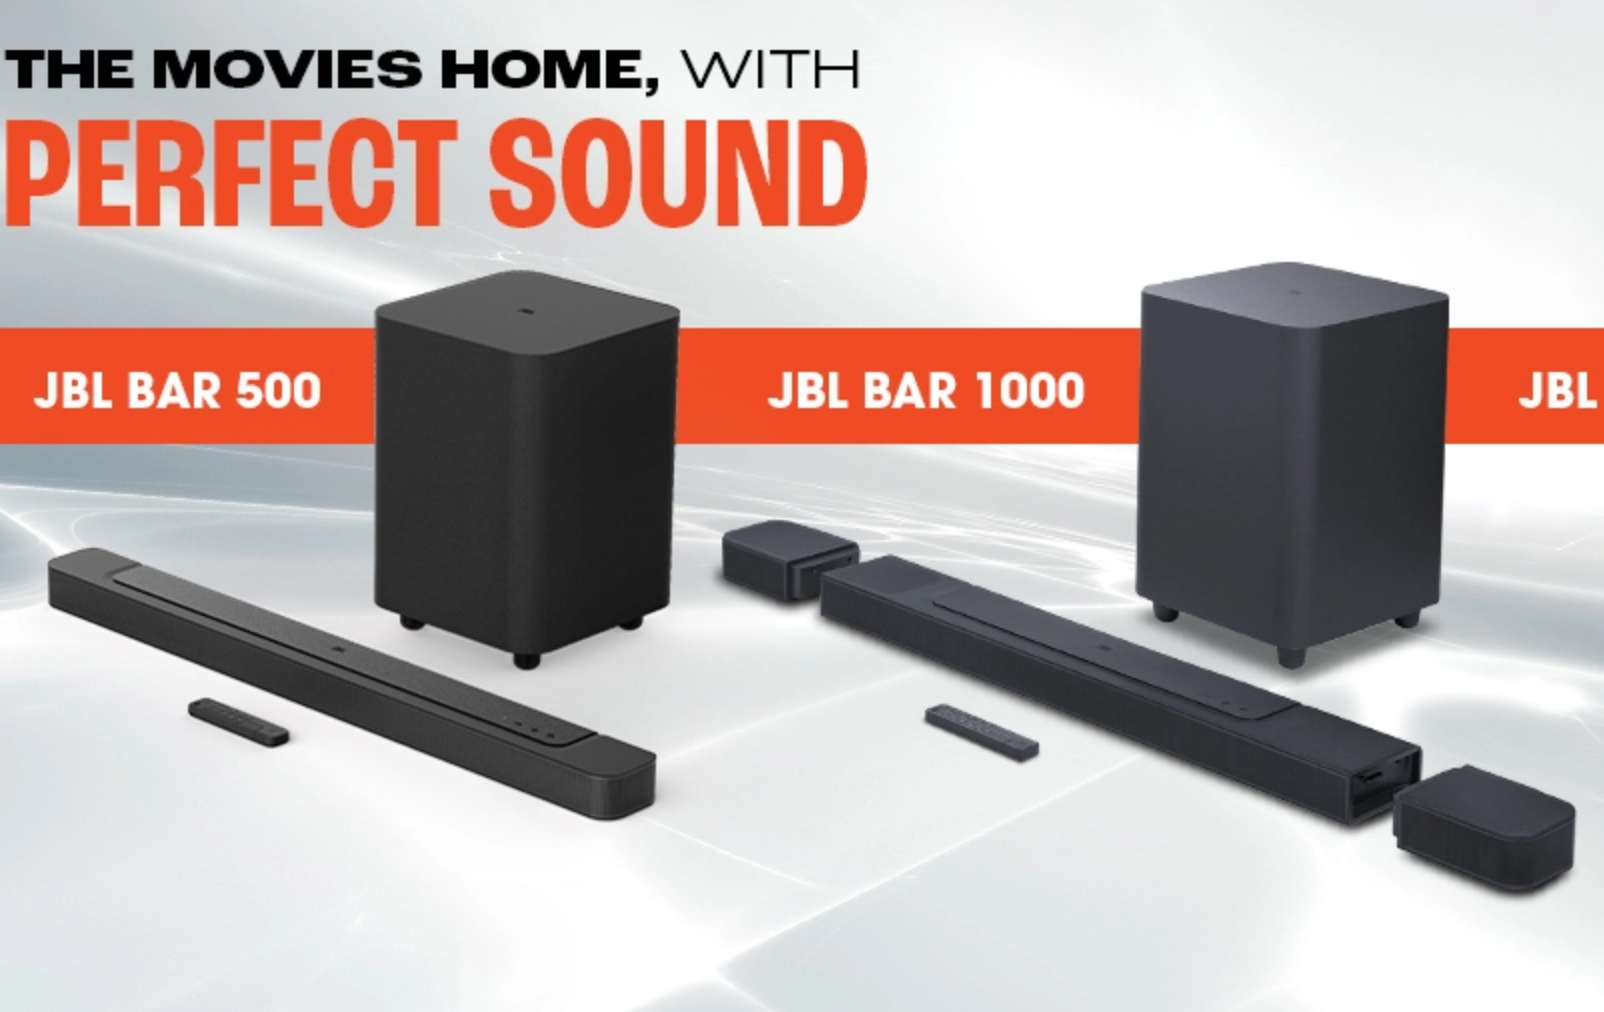 JBL Unveils the Bar Series Soundbars in India With Dolby Atmos - Gizmochina